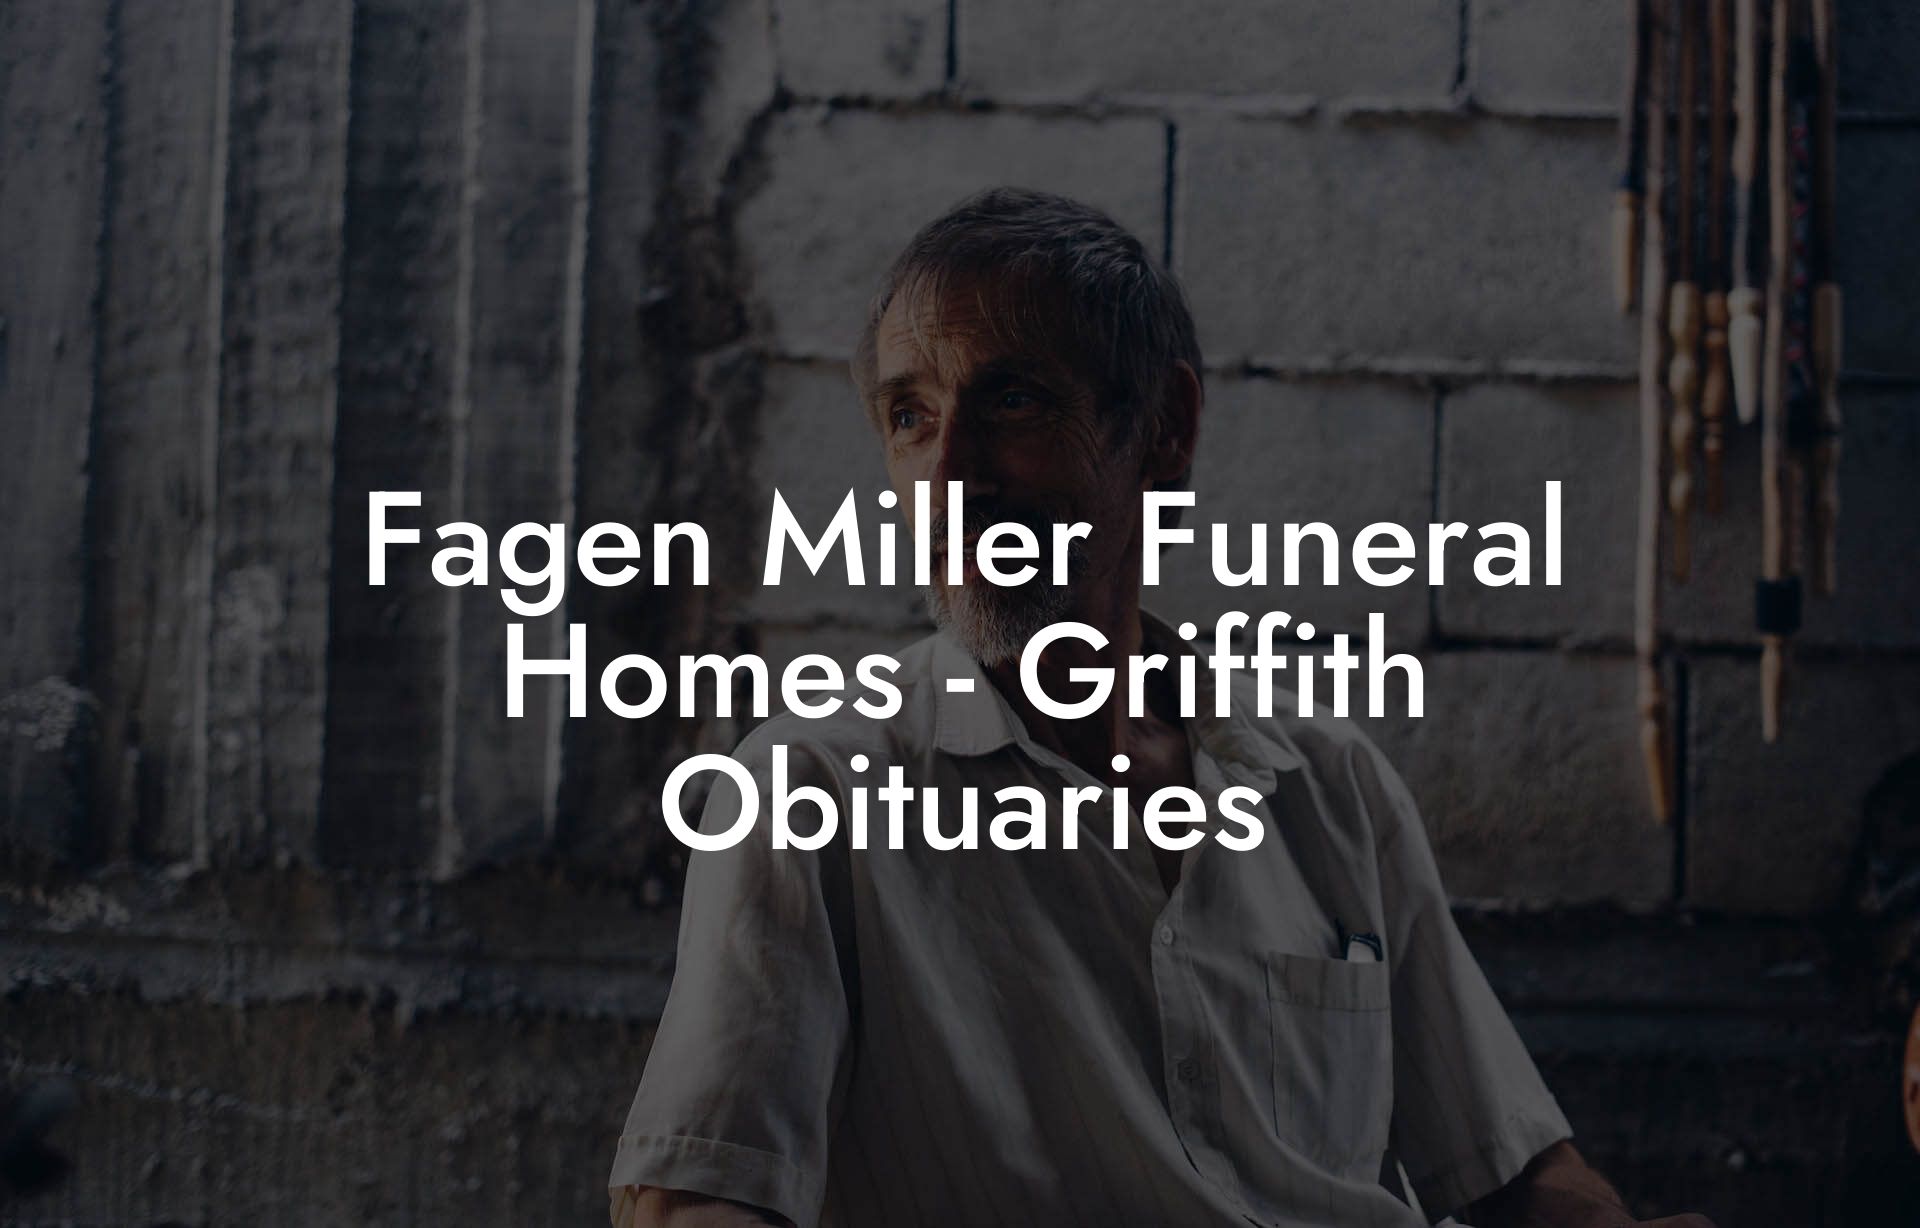 Fagen Miller Funeral Homes - Griffith Obituaries